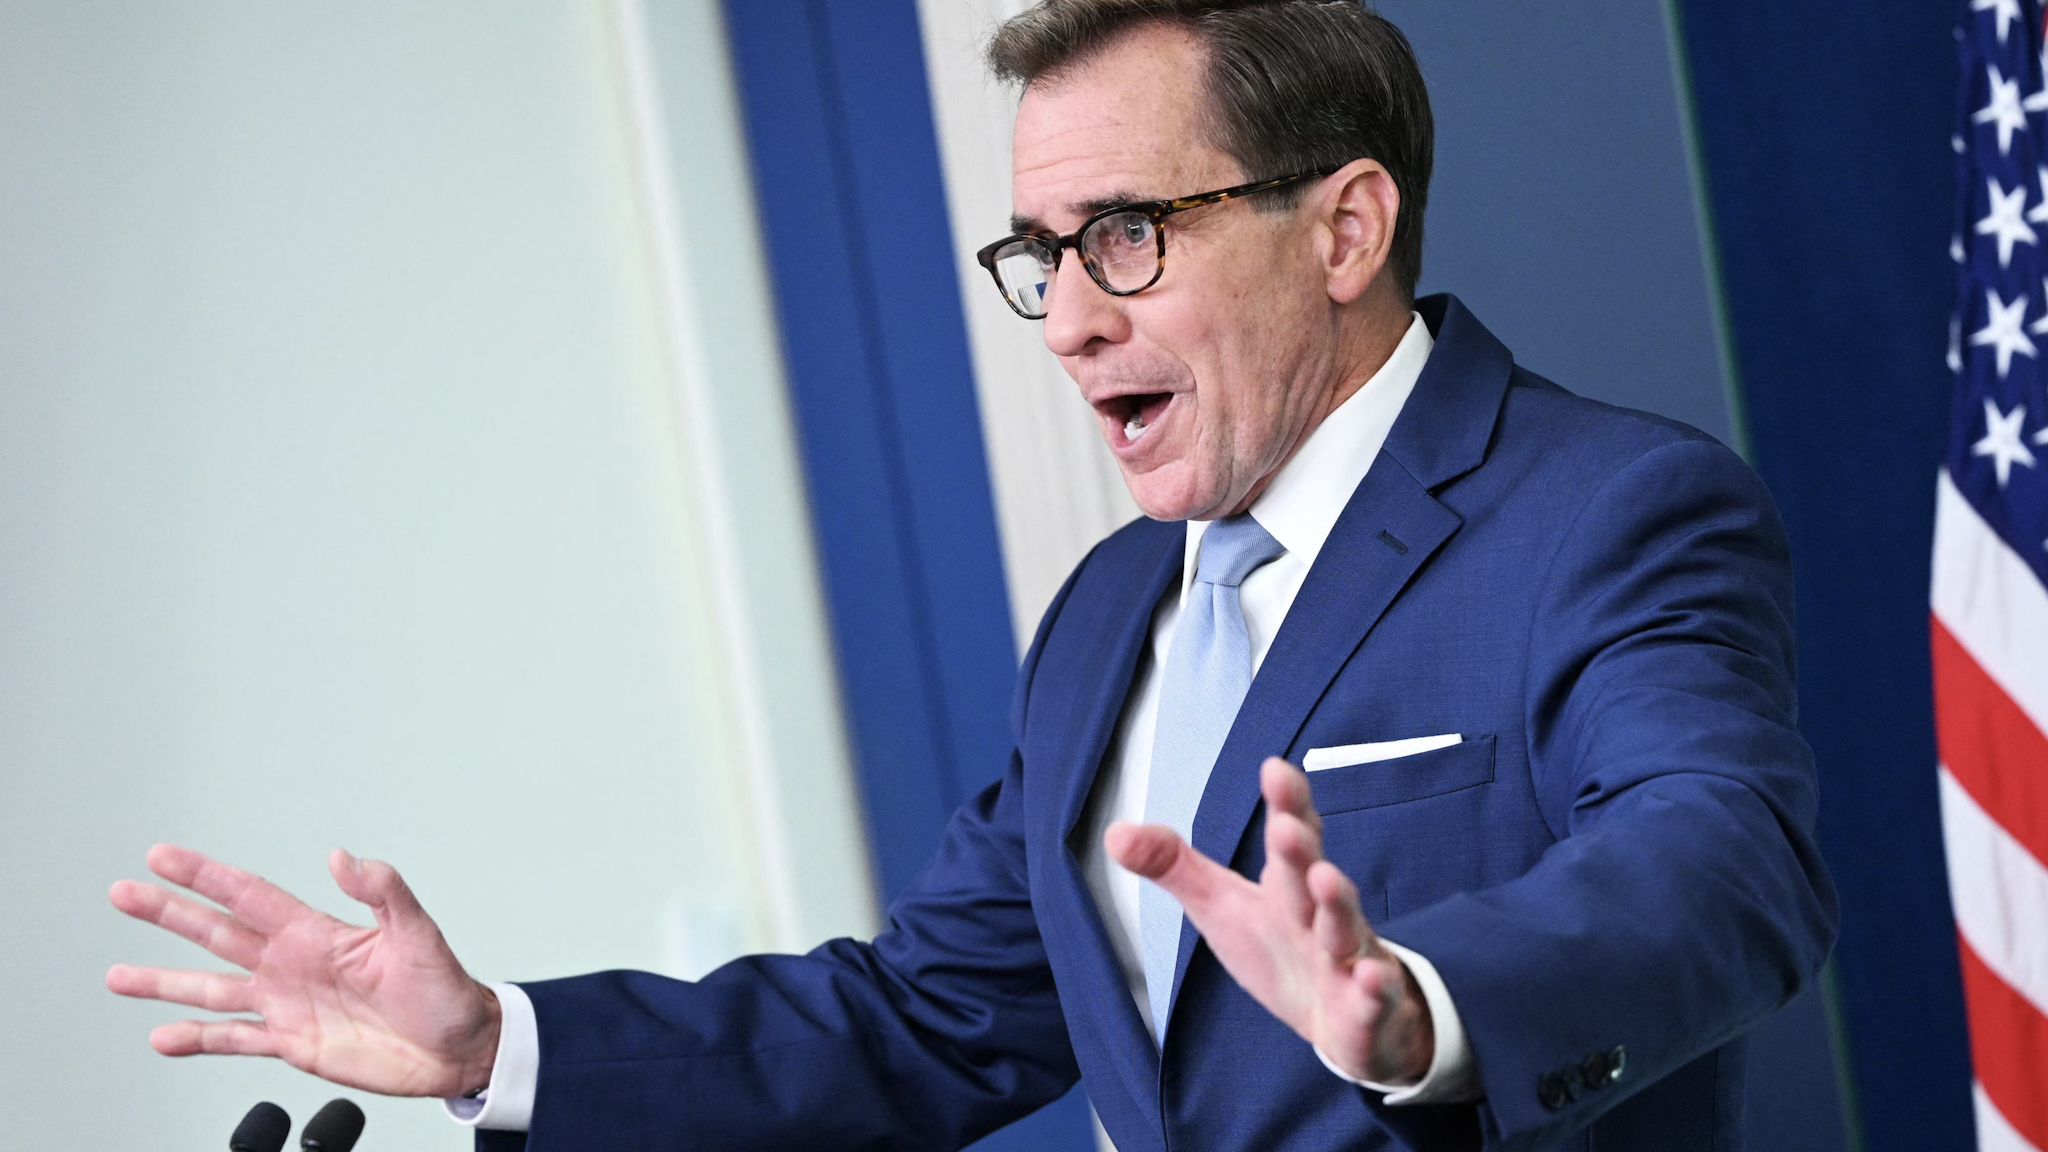 National Security Council Coordinator for Strategic Communications John Kirby speaks during the daily briefing in the Brady Press Briefing Room of the White House in Washington, DC, on July 26, 2023.